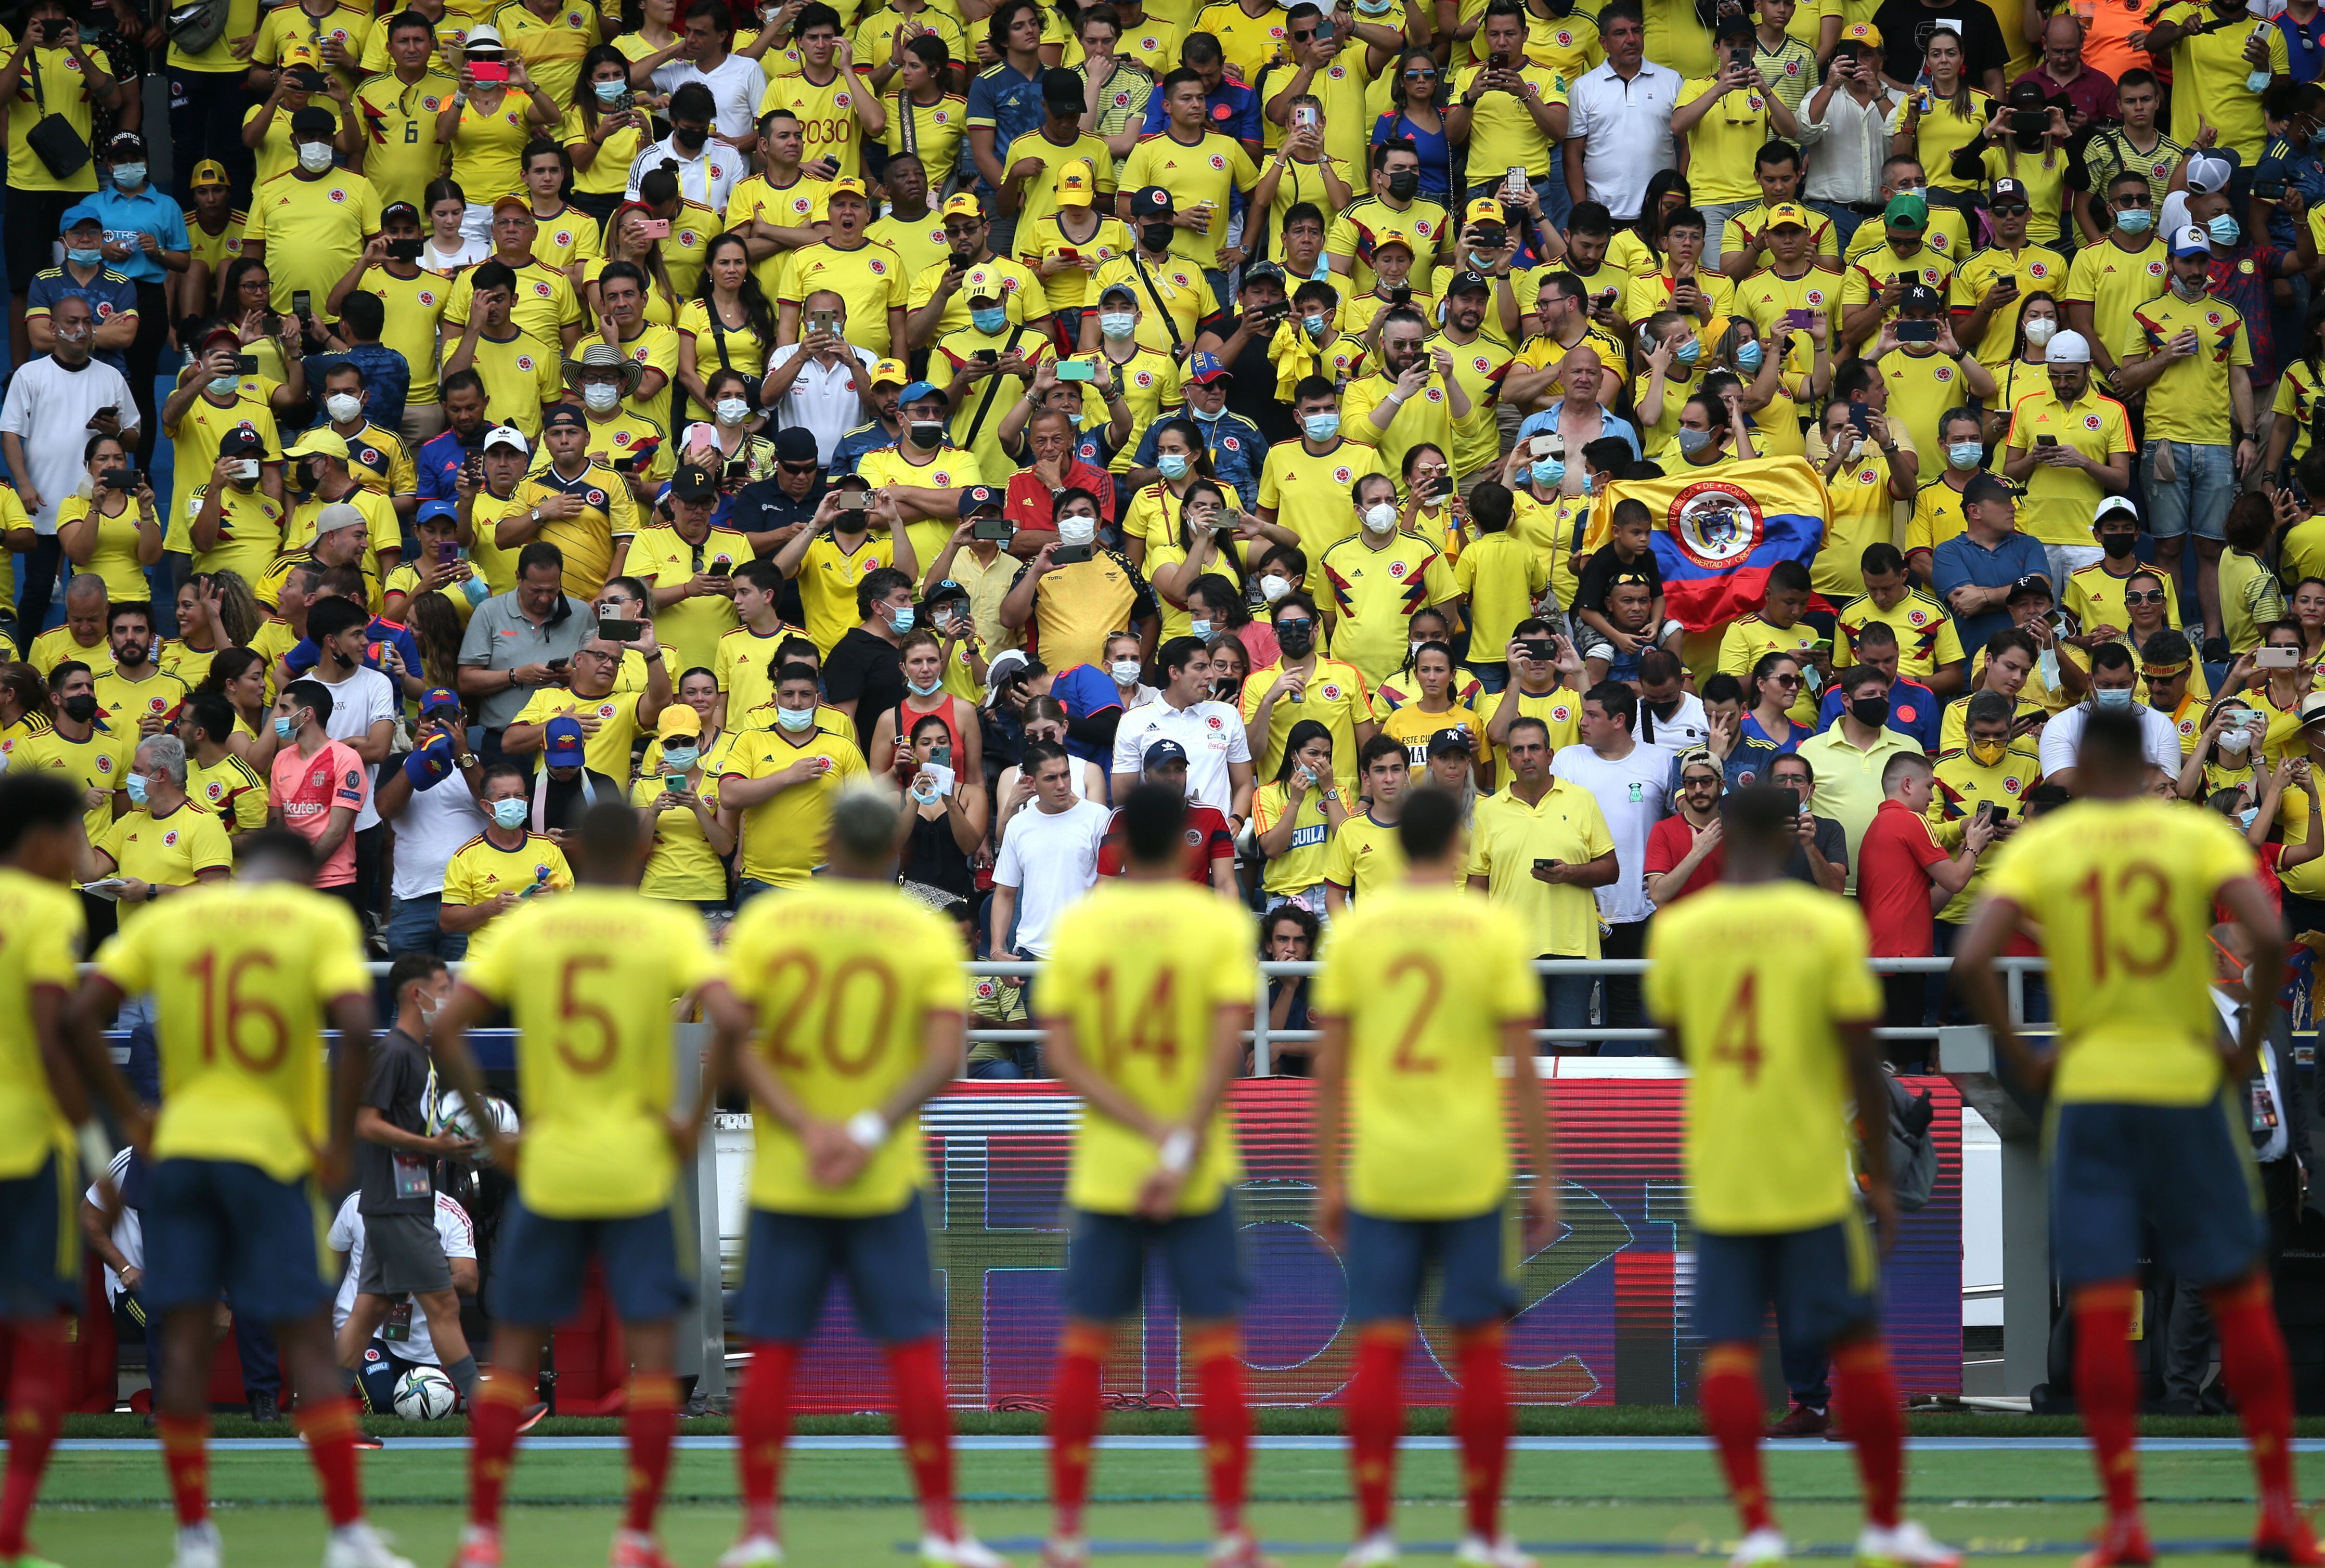 Soccer Football - World Cup - South American Qualifiers - Colombia v Brazil - Estadio Metropolitano Roberto Melendez, Barranquilla, Colombia - October 10, 2021 Colombia players line up before the match REUTERS/Luisa Gonzalez